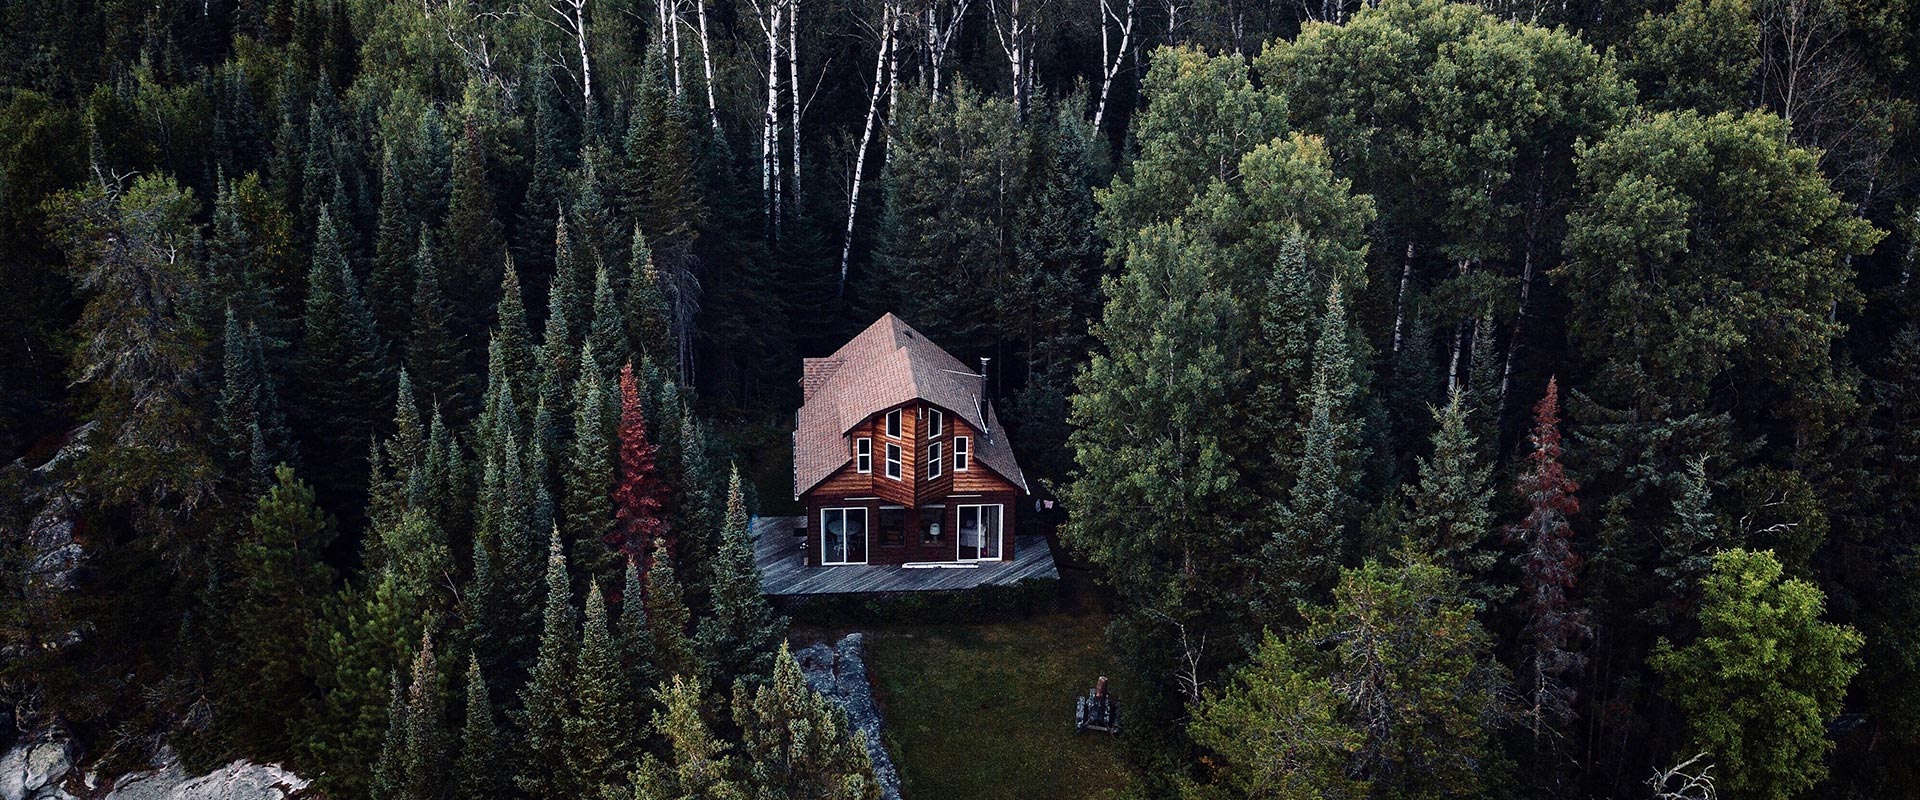 A ranch cabin in a dense forest area